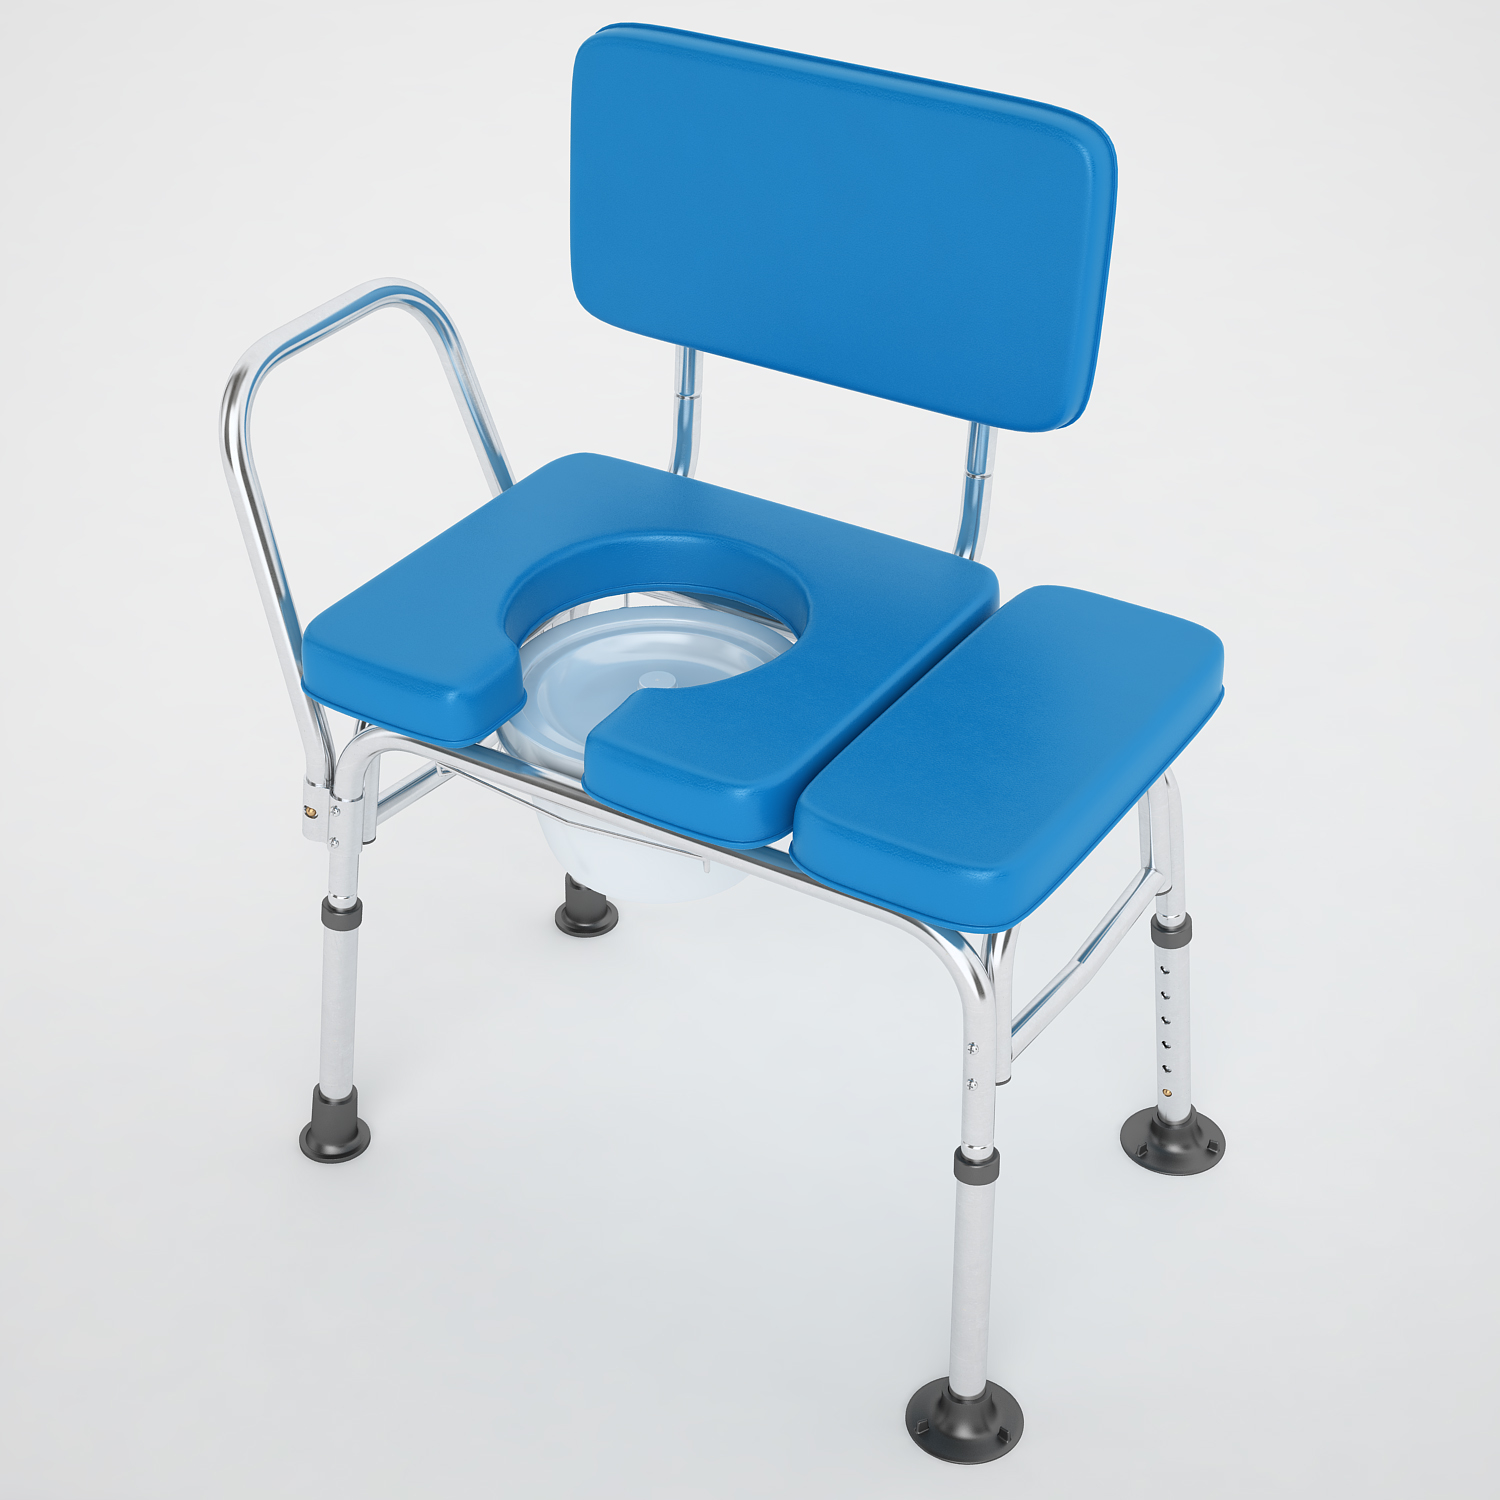 Bedside Commode Chair 3d Model Turbosquid 1389389